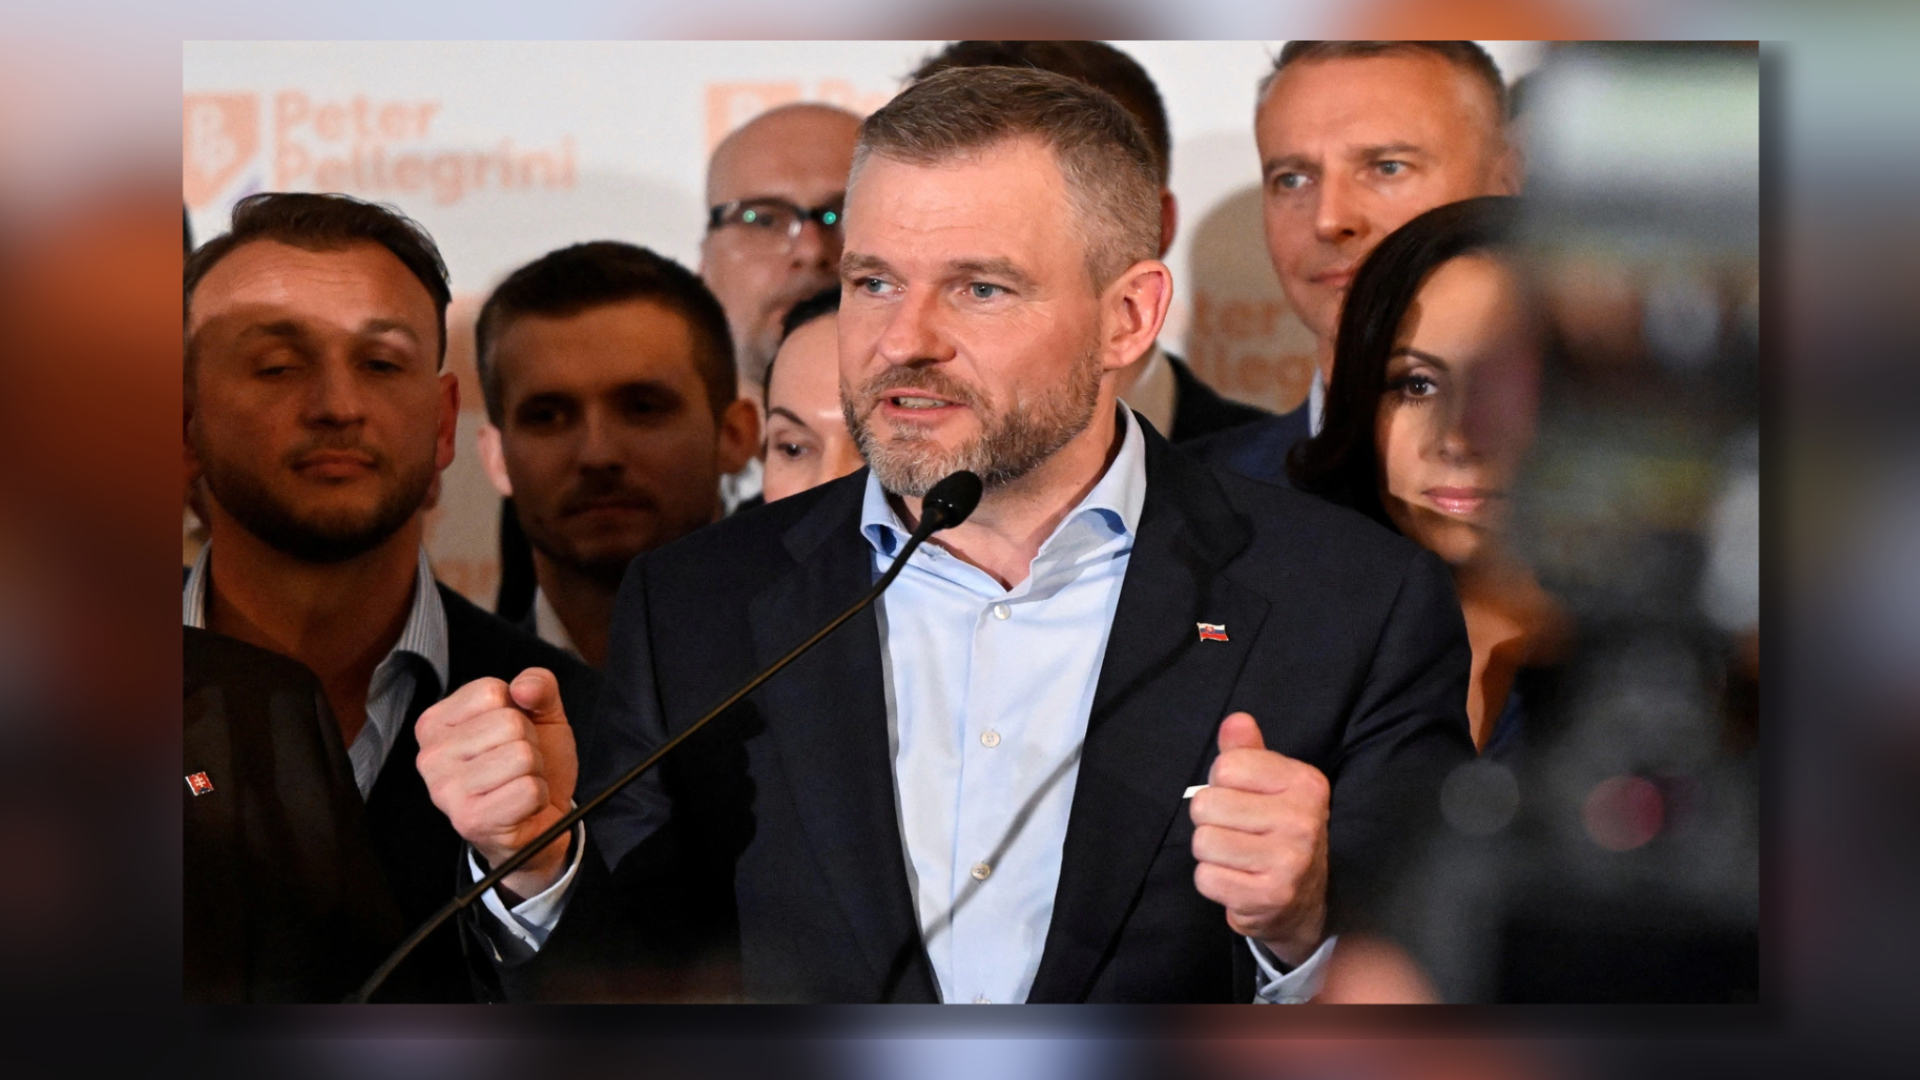 Peter Pellegrini Elected As Slovakia’s President, Seen As Russia-Friendly Populist